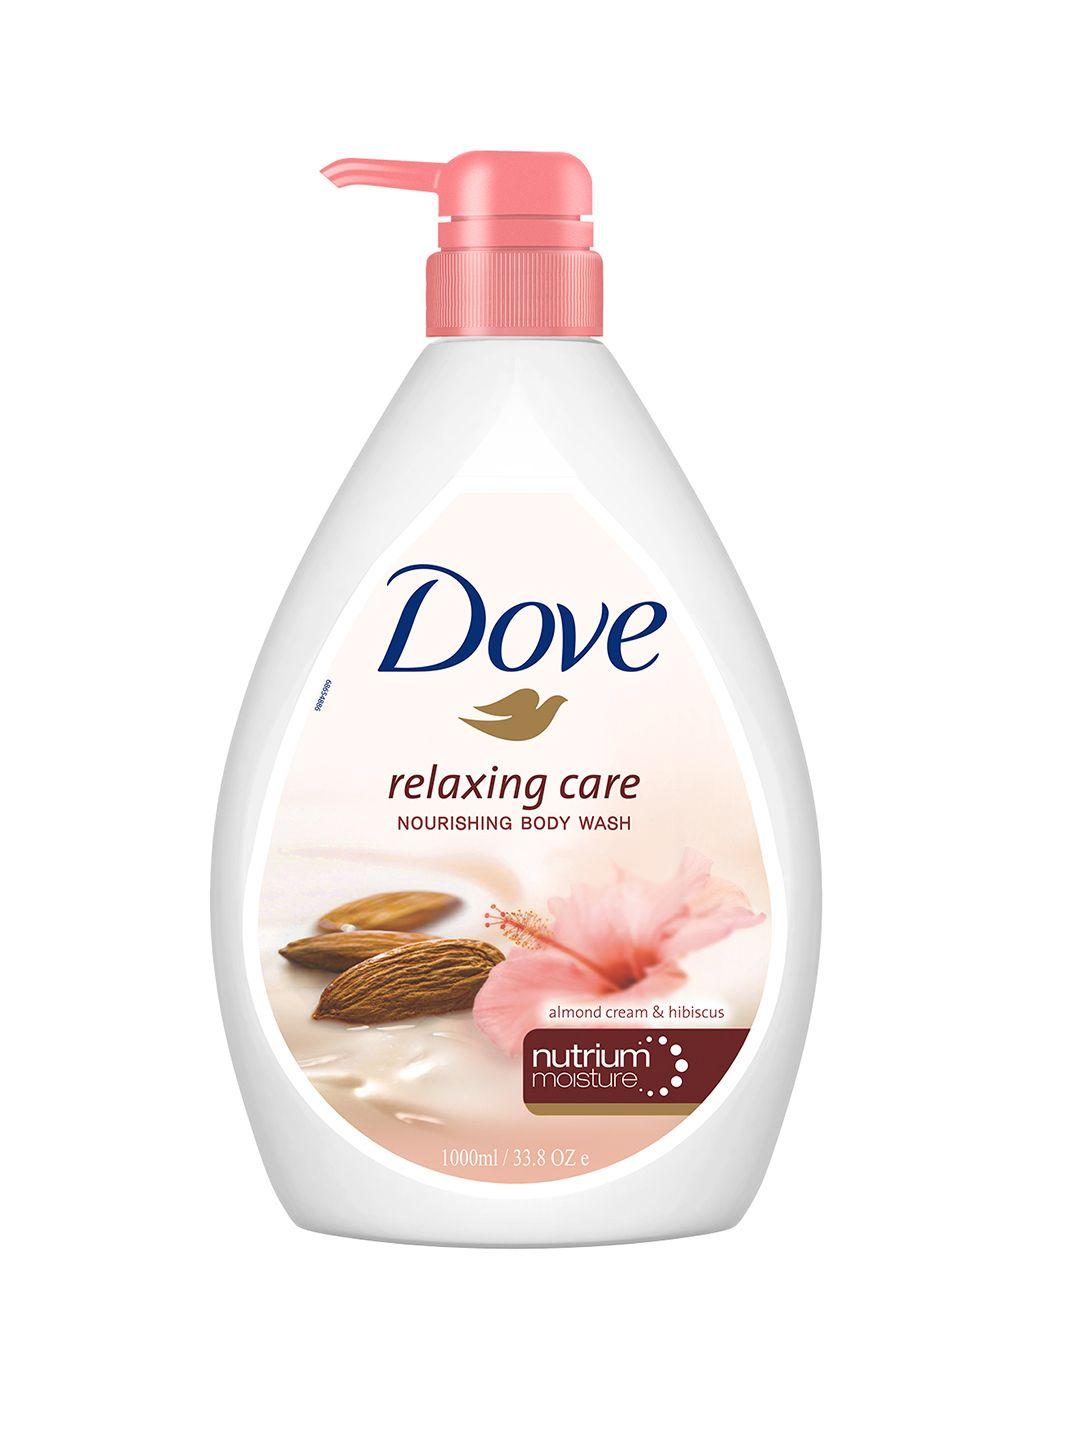 dove relaxing care nourishing body wash with almond cream & hibiscus - 1l